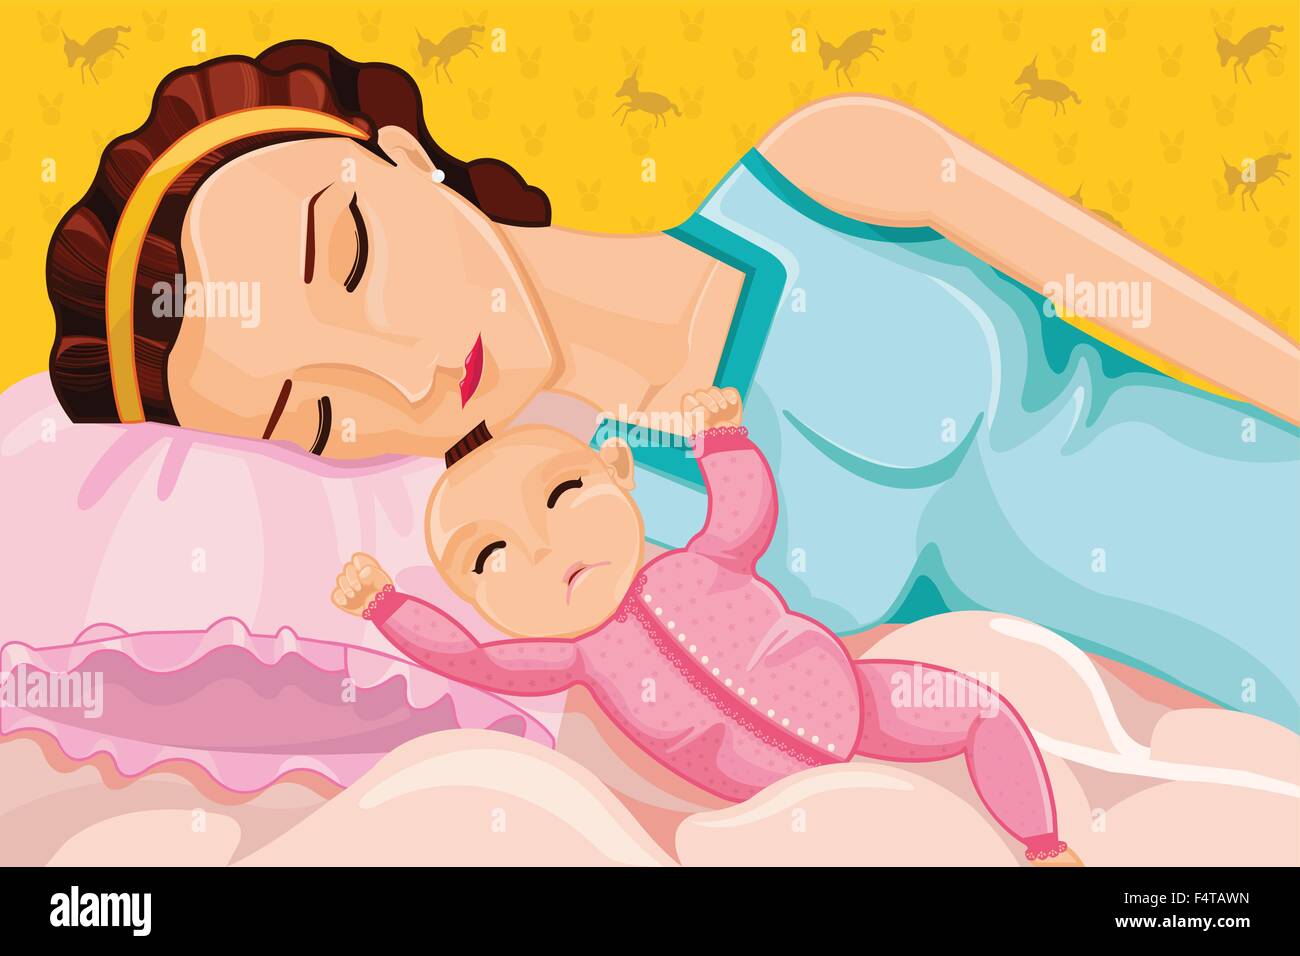 A vector illustration of mother sleeping with a baby on bed Stock Vector